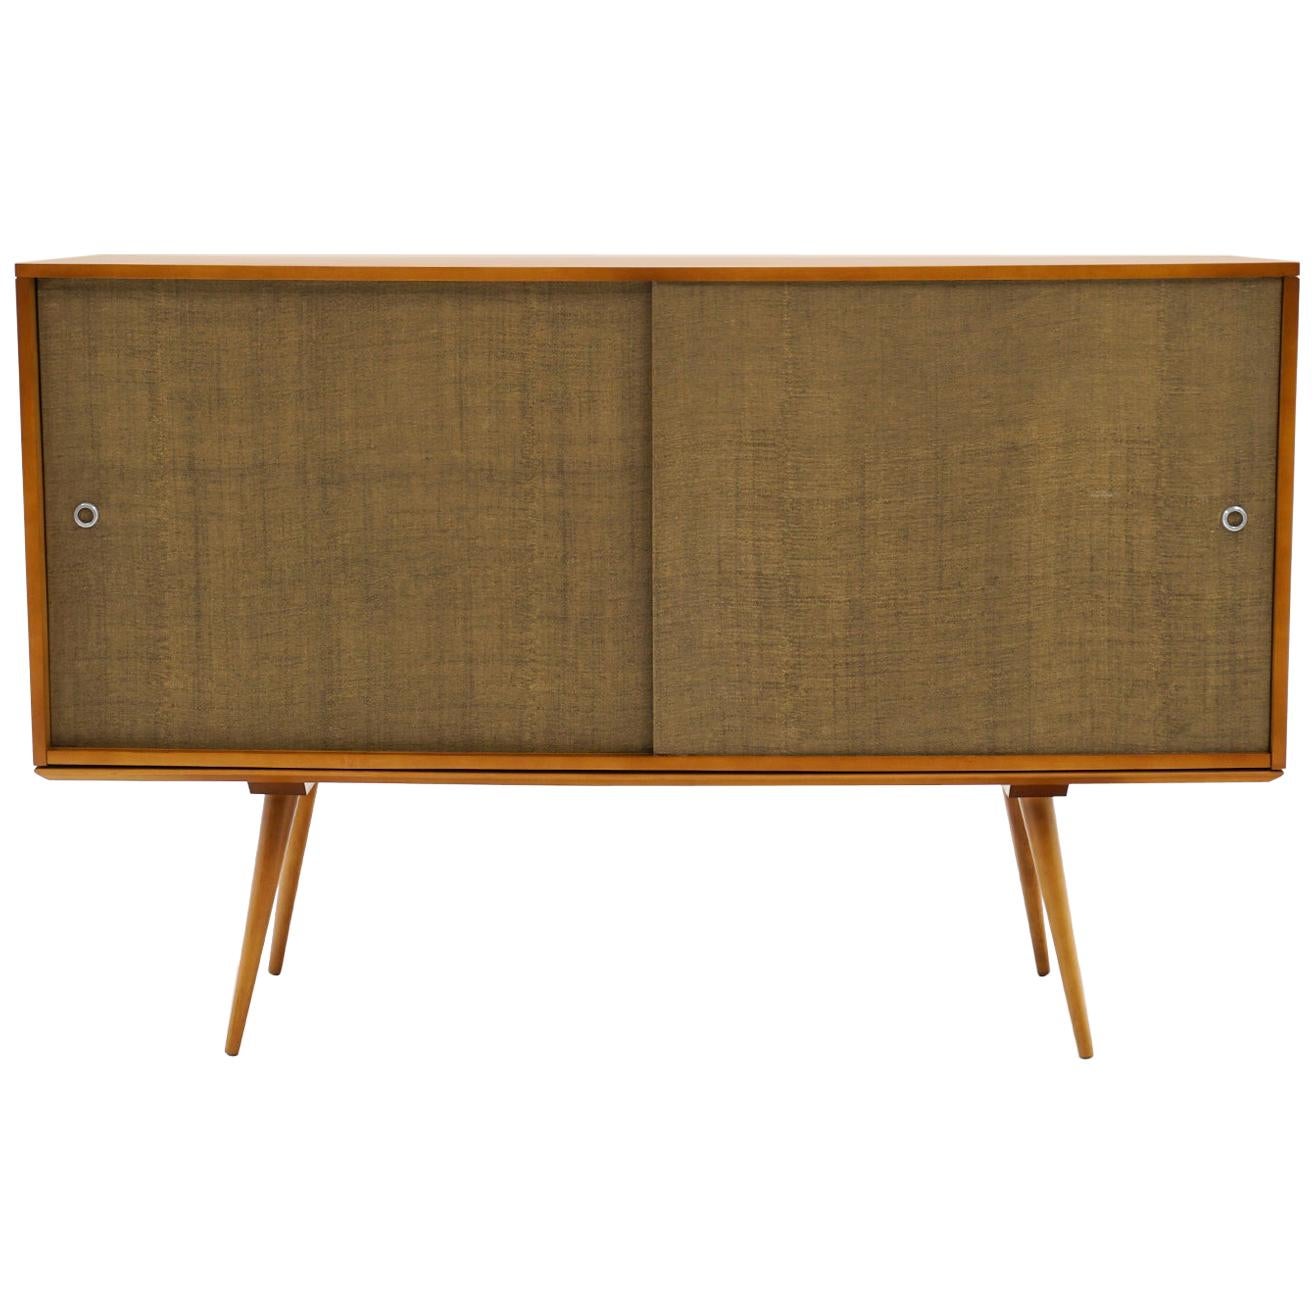 Tall Sideboard Storage Cabinet on Platform Bench by Paul McCobb for Winchendon